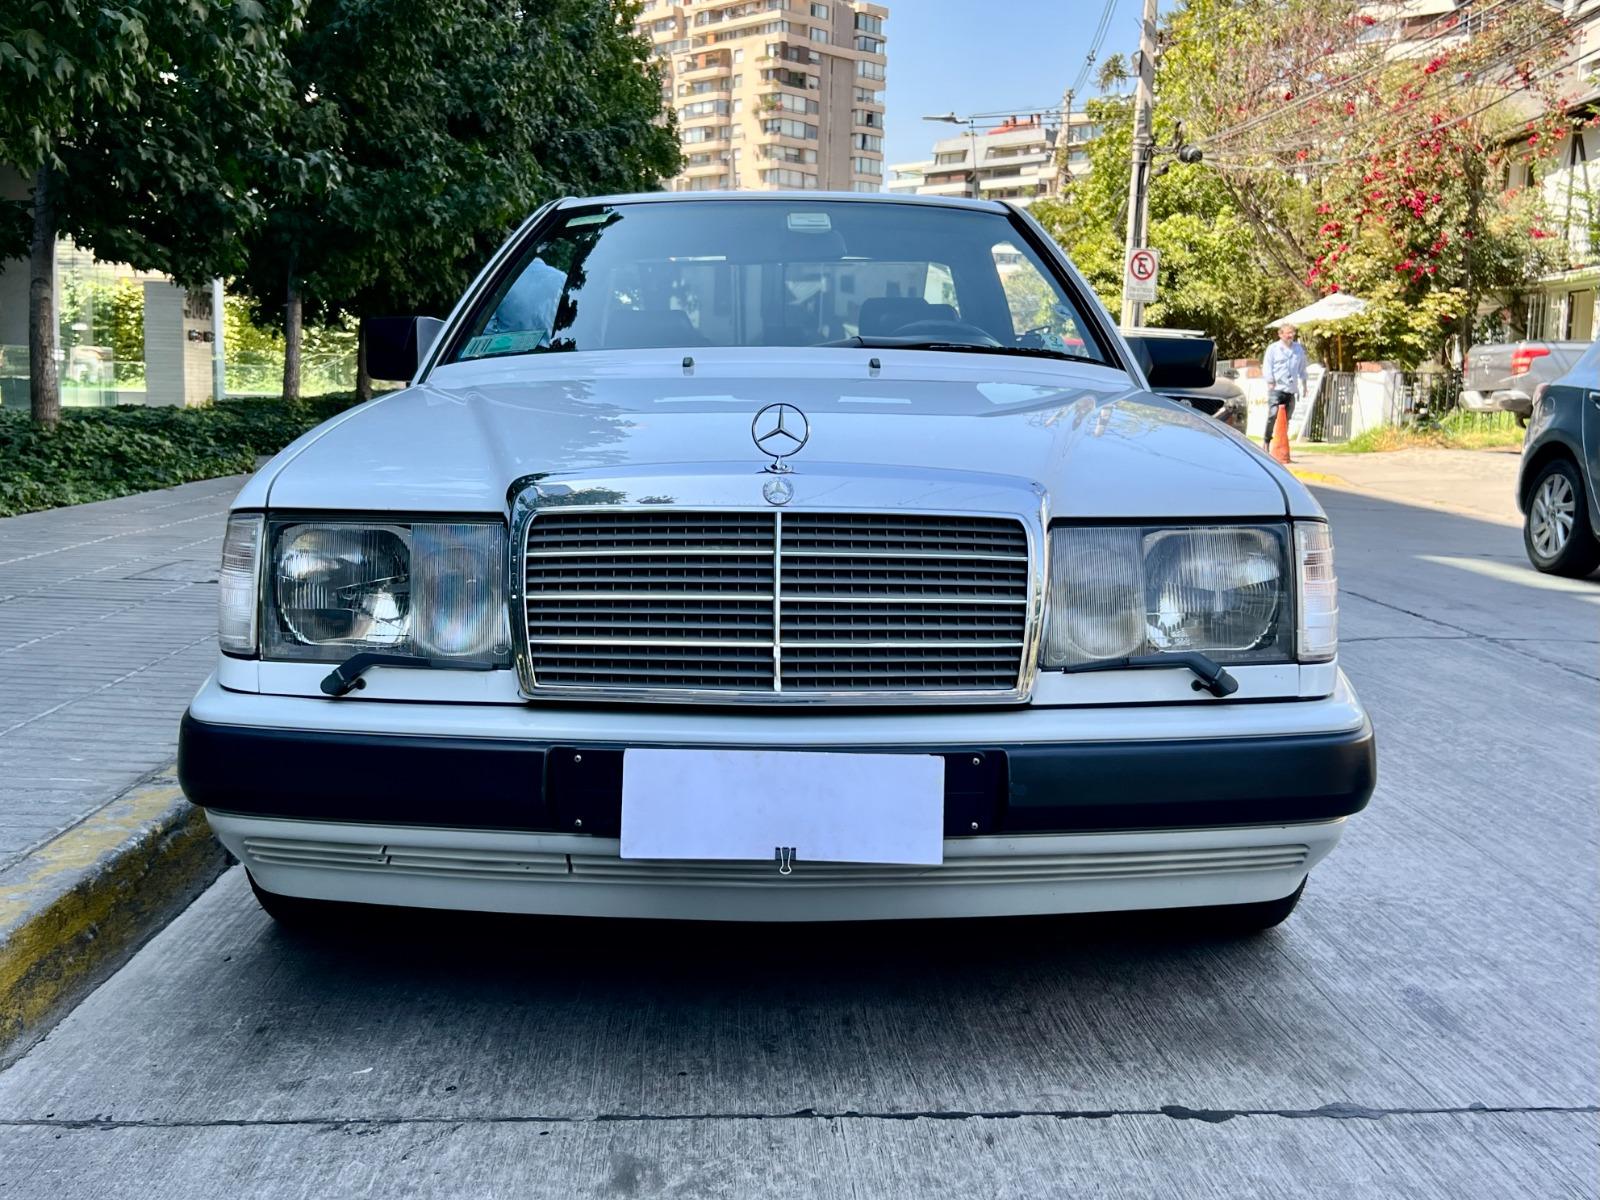 MERCEDES-BENZ 300 CE 1989 COUPE - FULL MOTOR